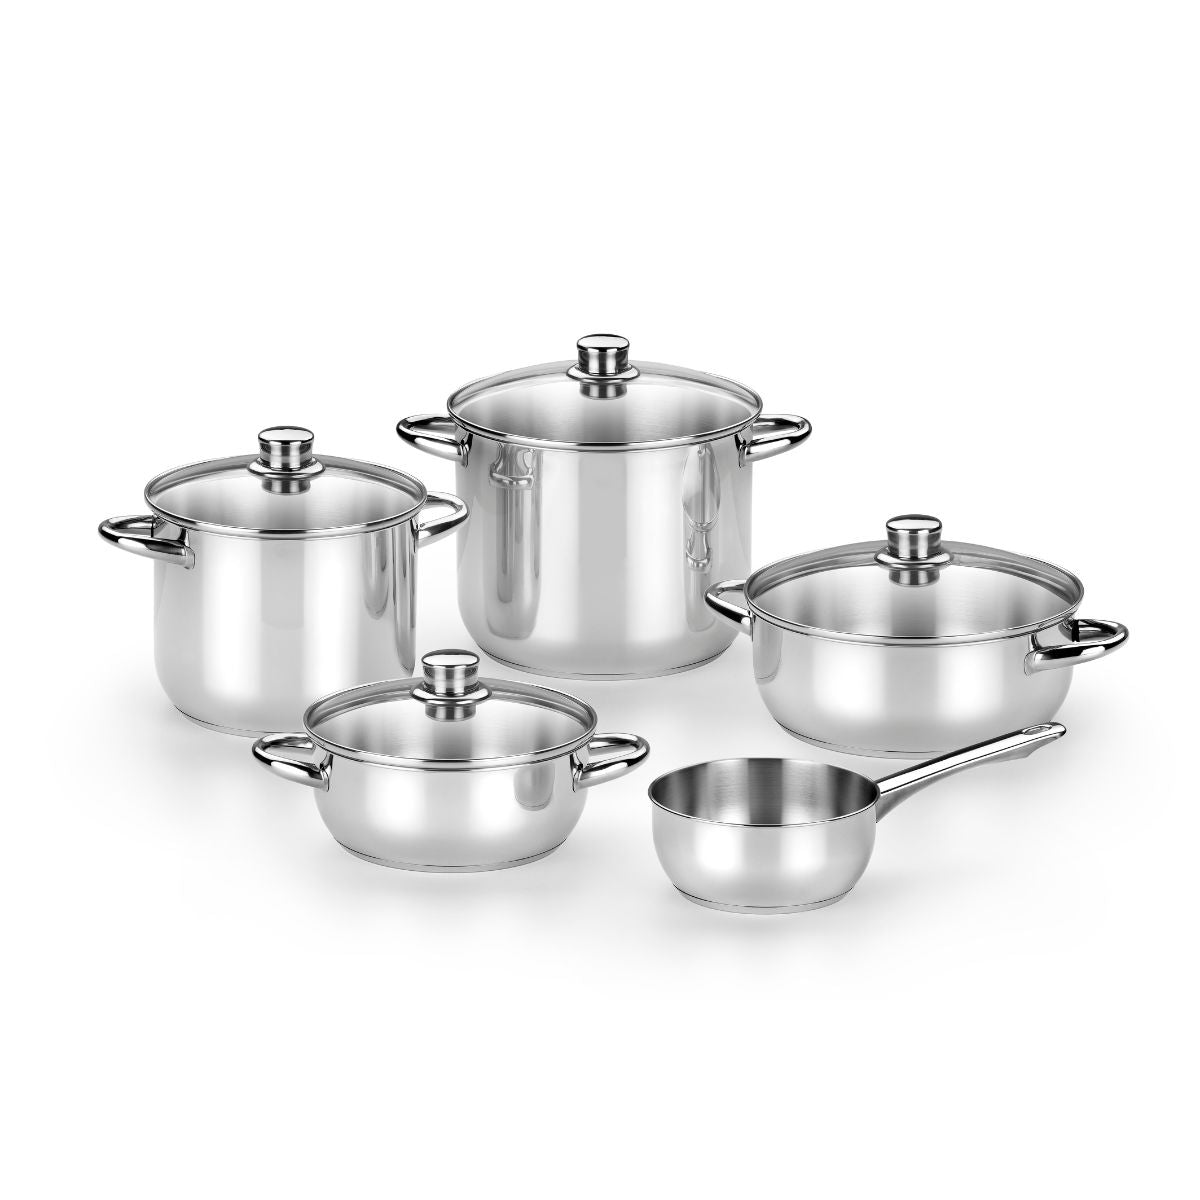 Optima 9-piece Cookware Set with Glass Lid